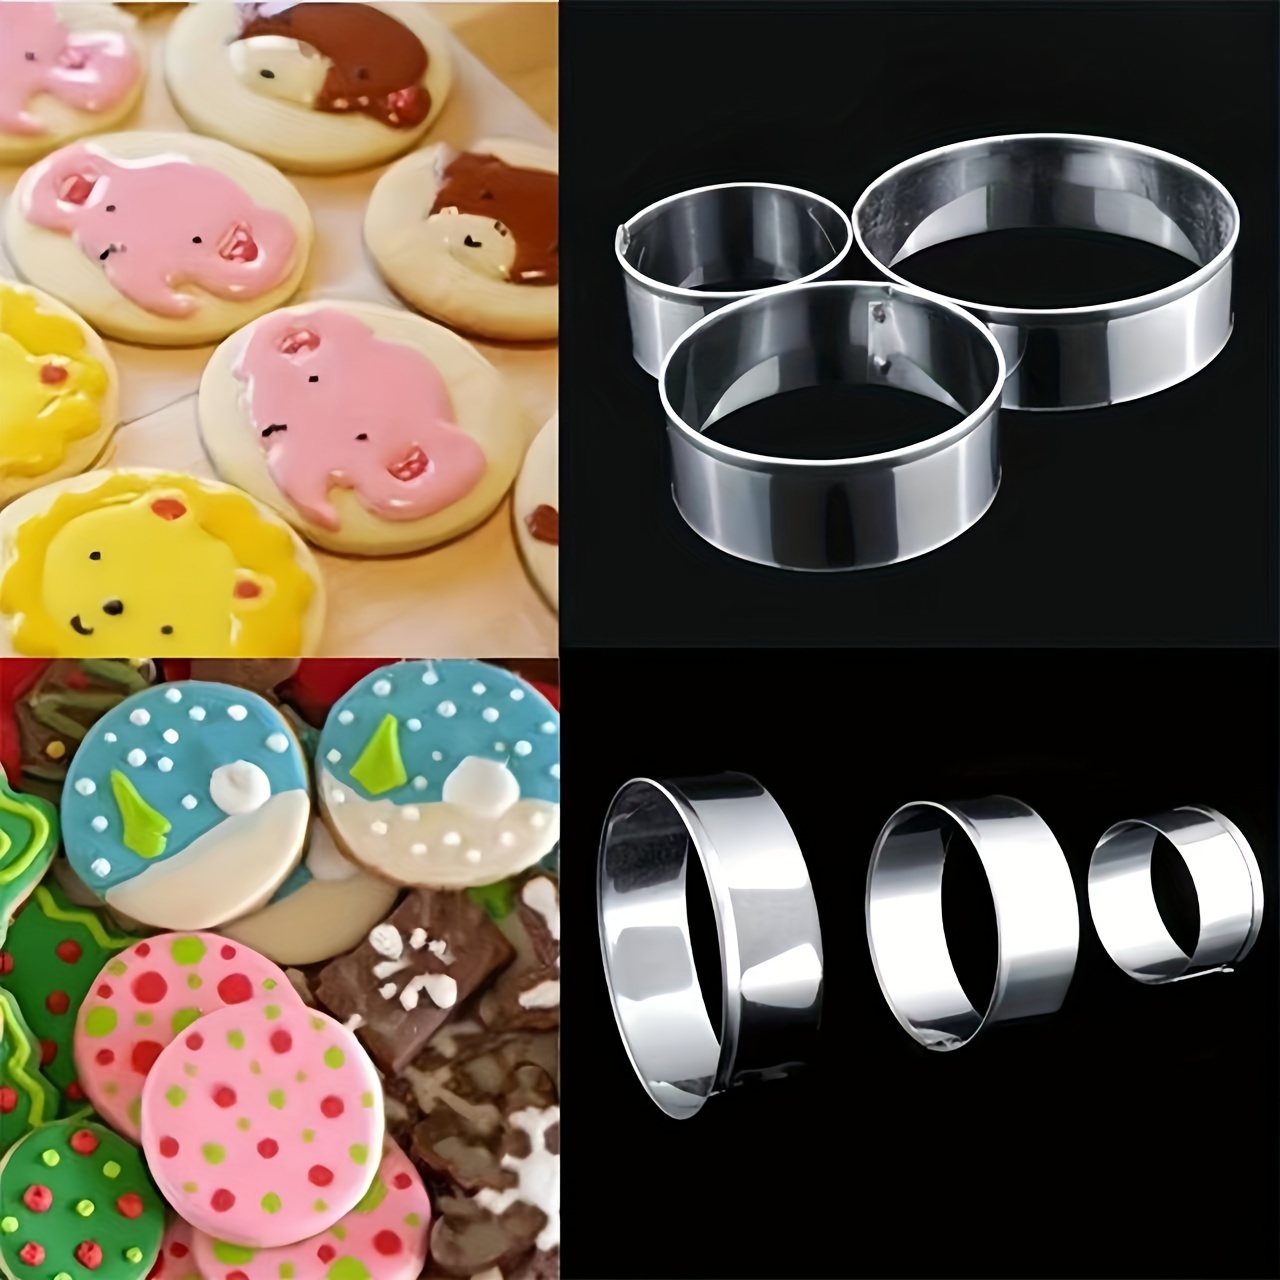 Round Fondant Cookie Pastry Cutter Set